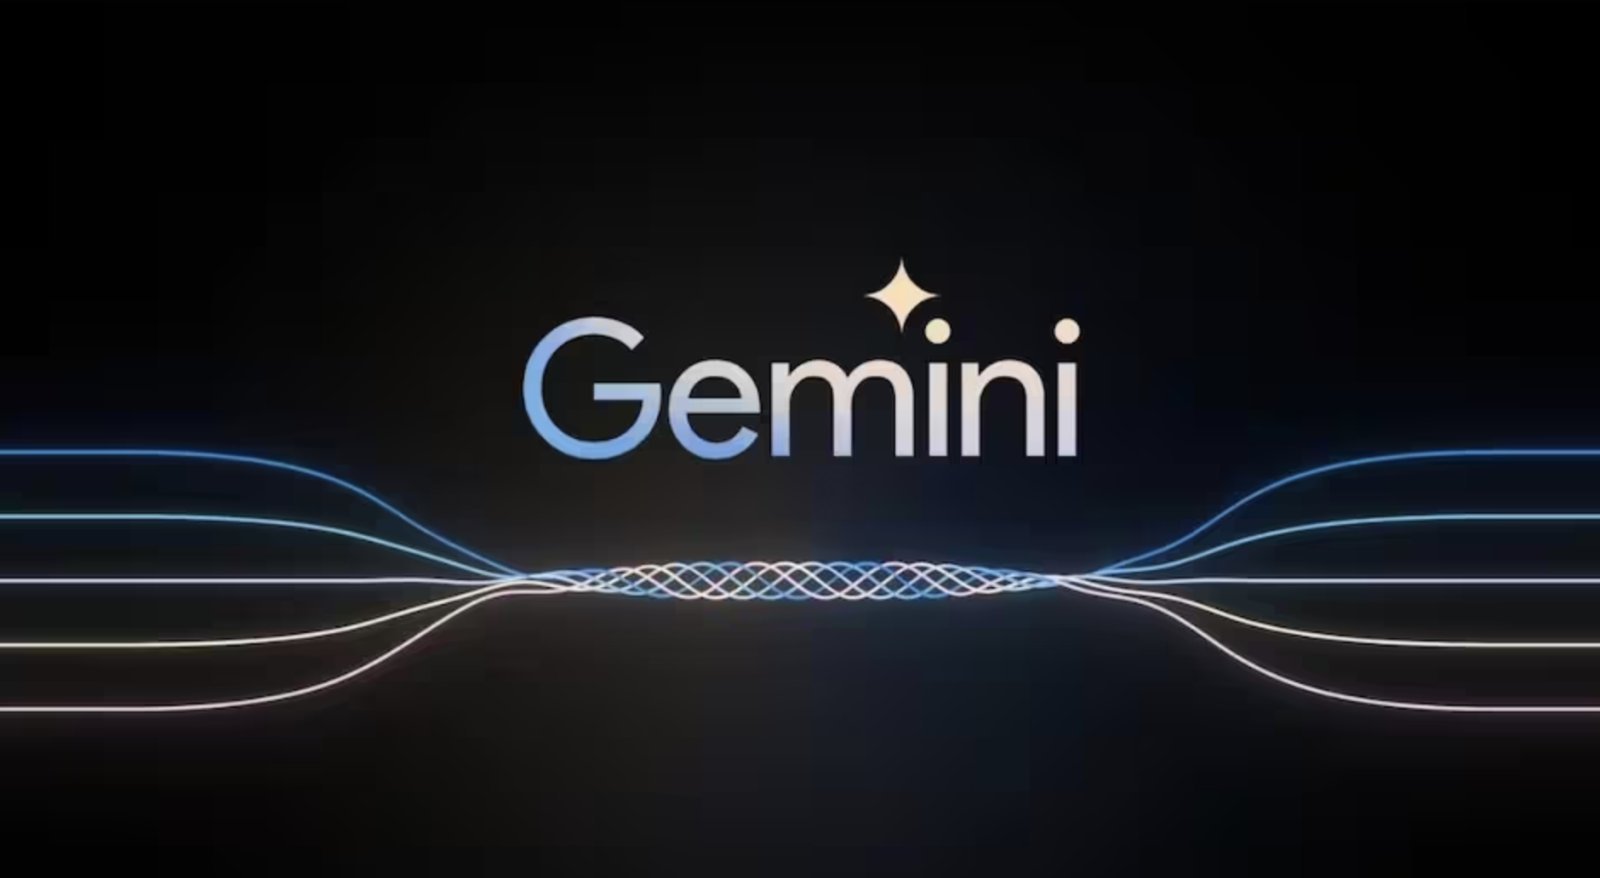 Google Gemini: Why is Google's latest AI model special and better? Know all the important details here